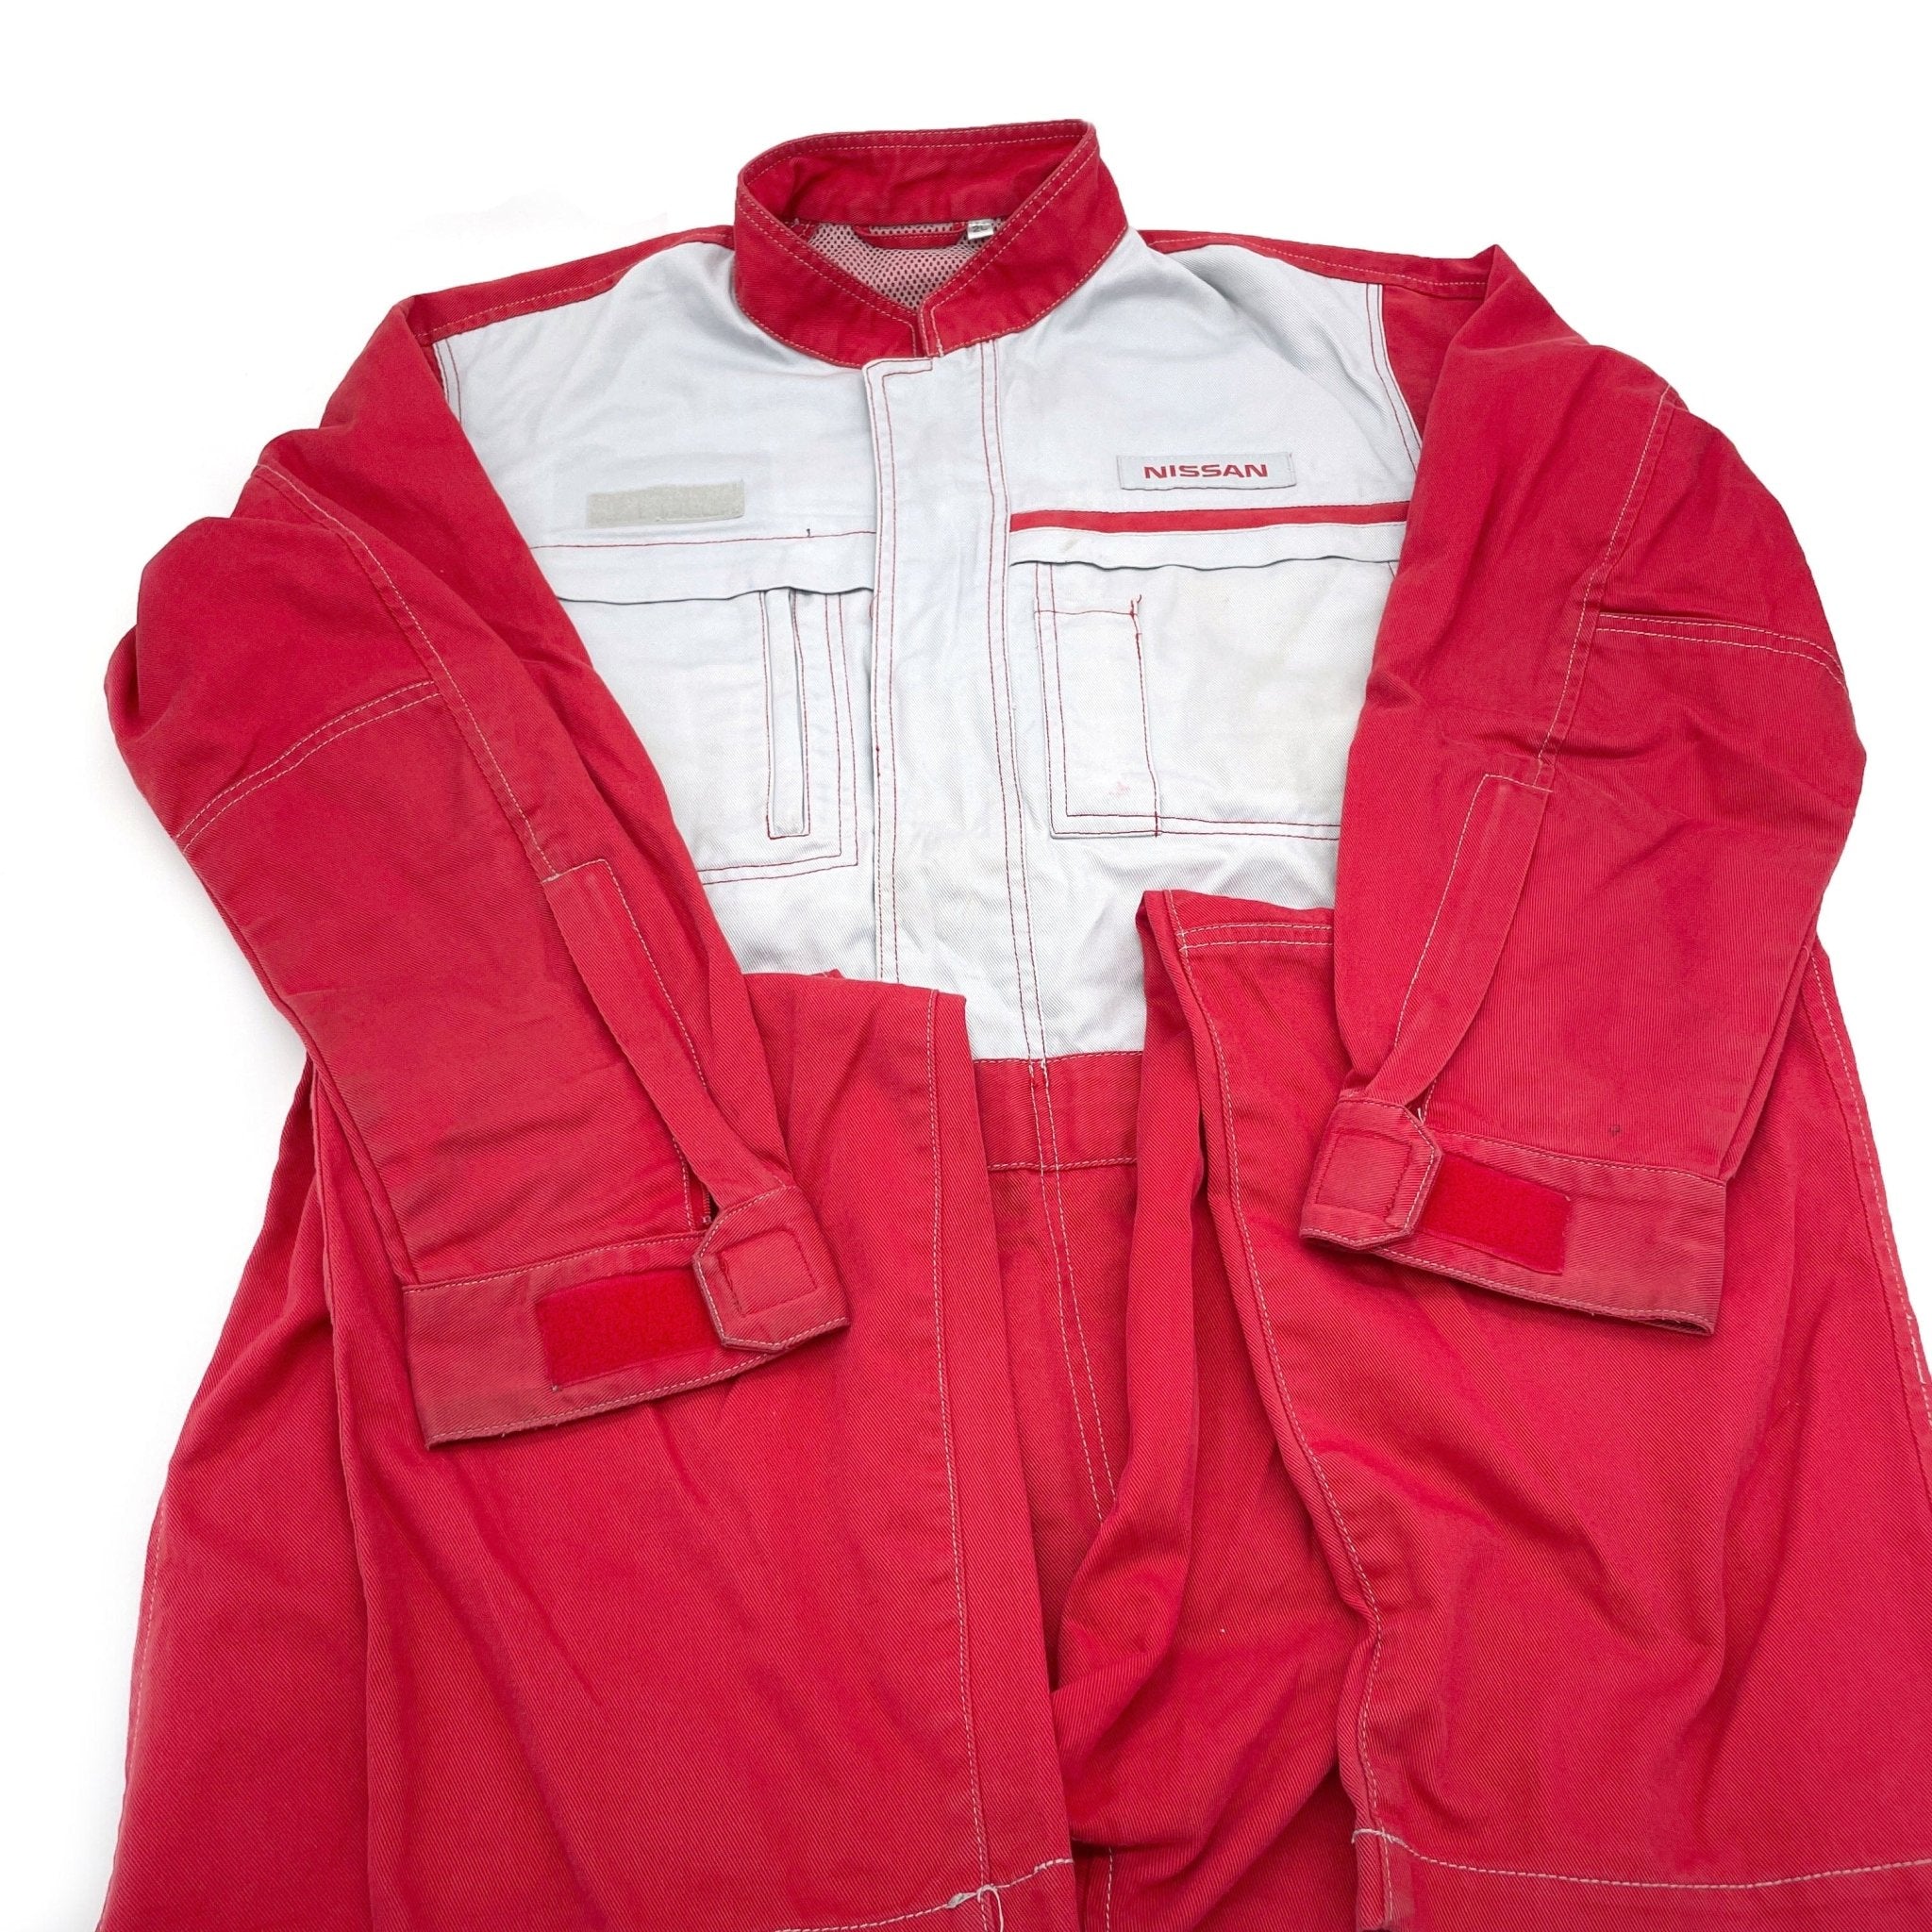 Coveralls & Overalls | Red Kap®